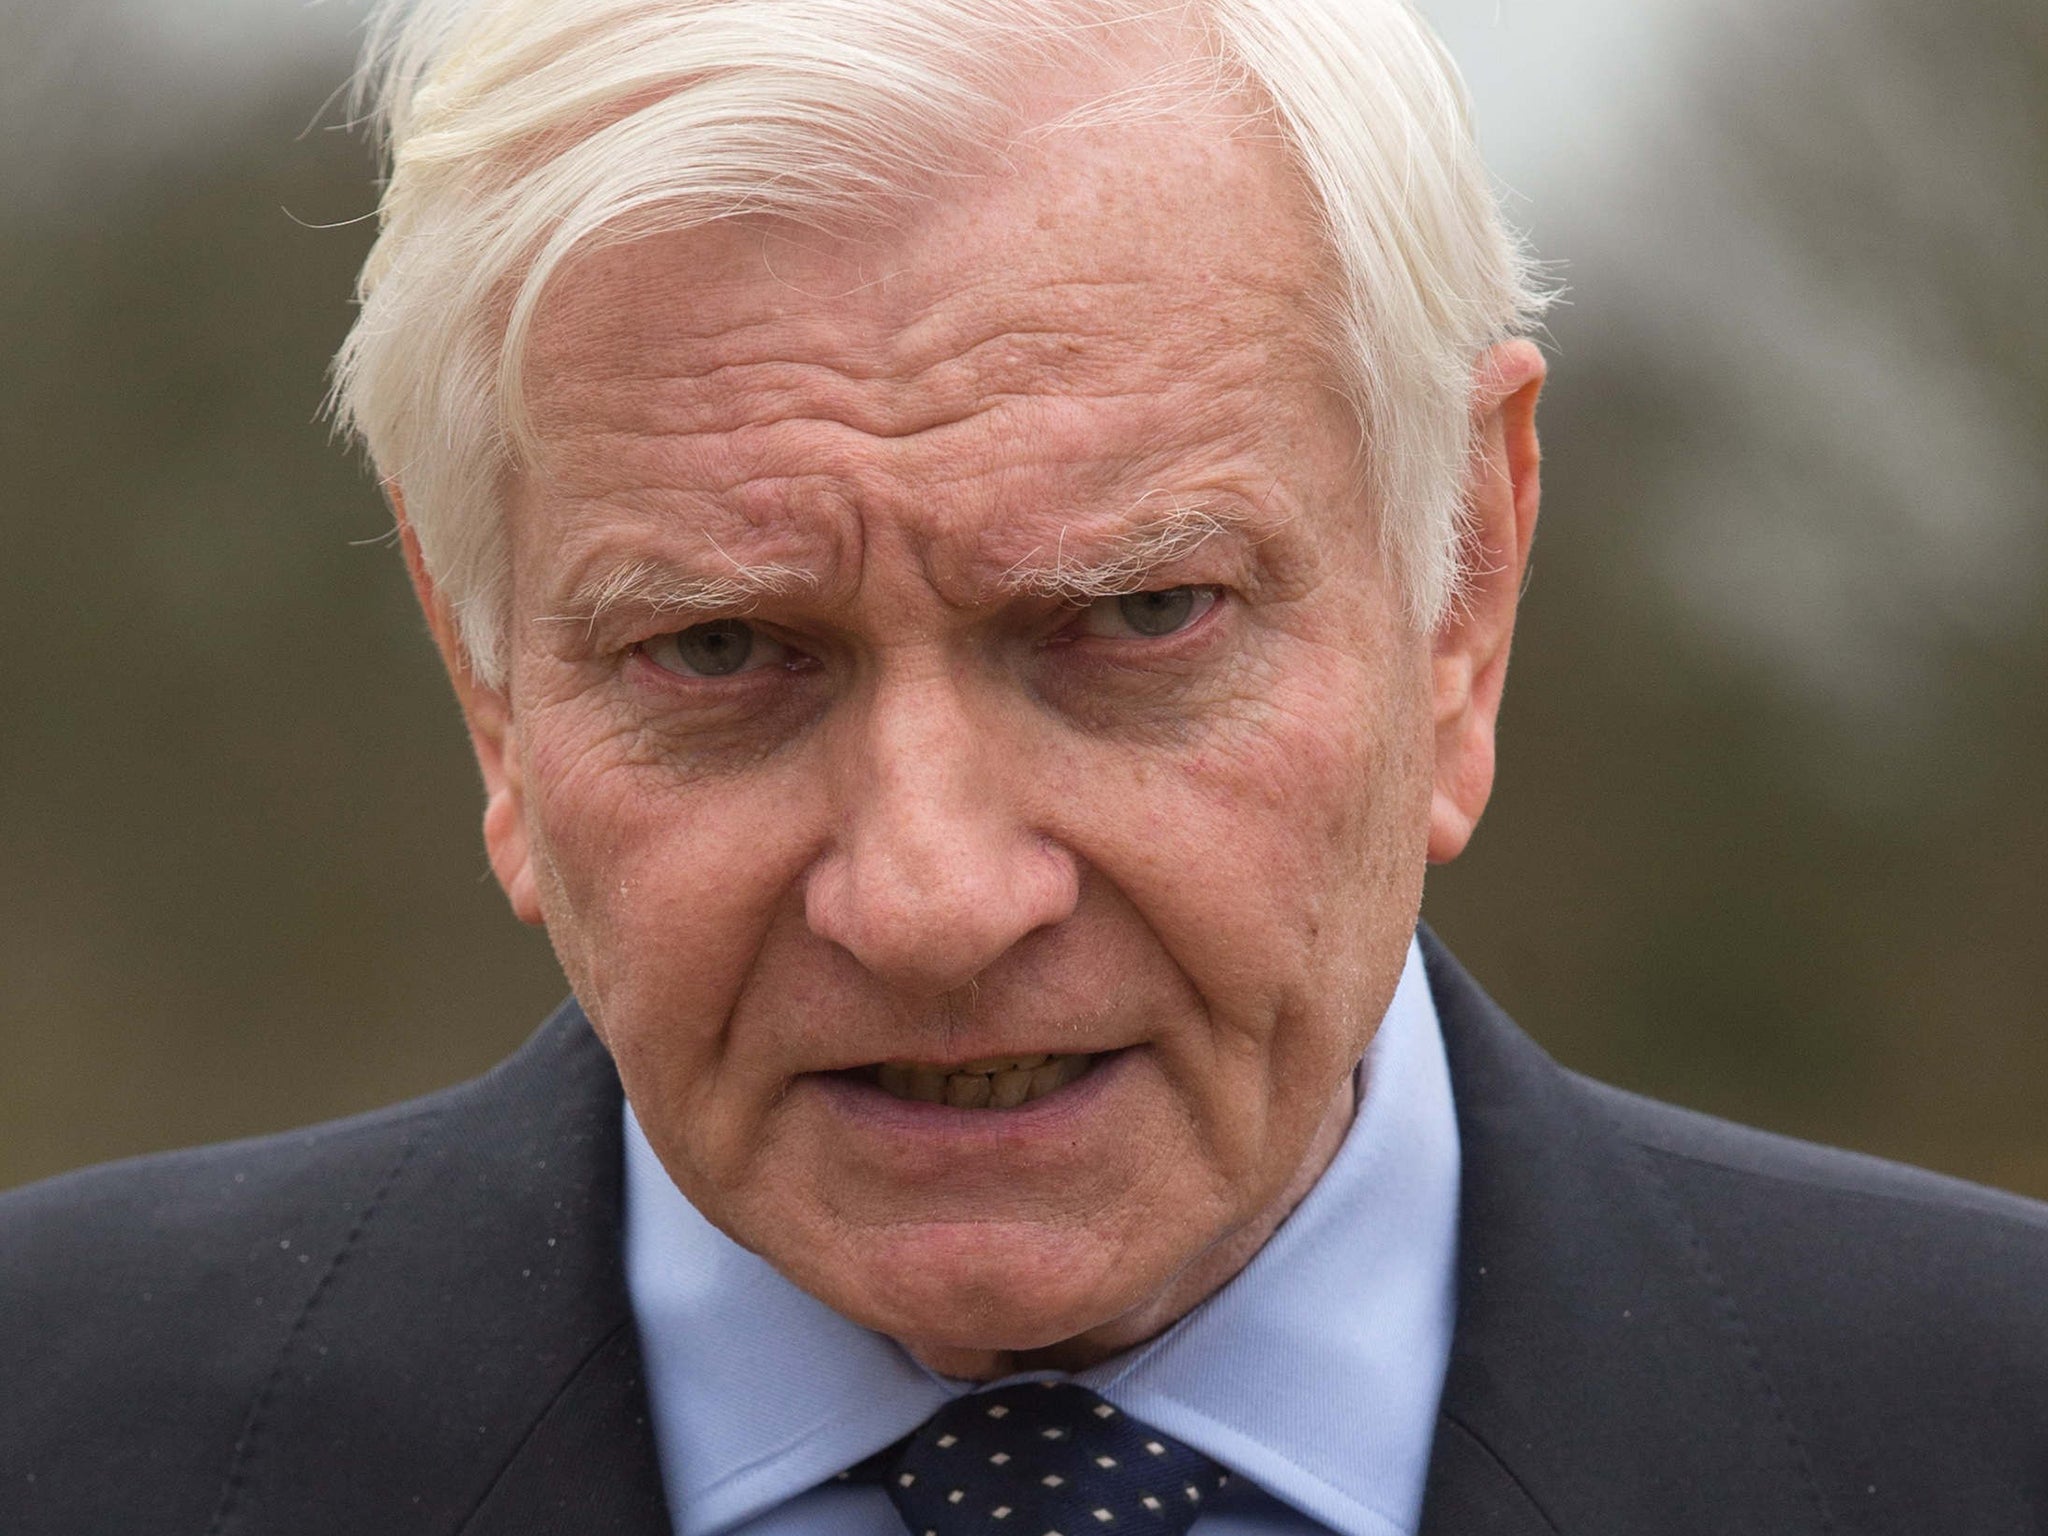 Harvey Proctor, who quit as an MP in 1987, said
yesterday he had never been to any sex parties